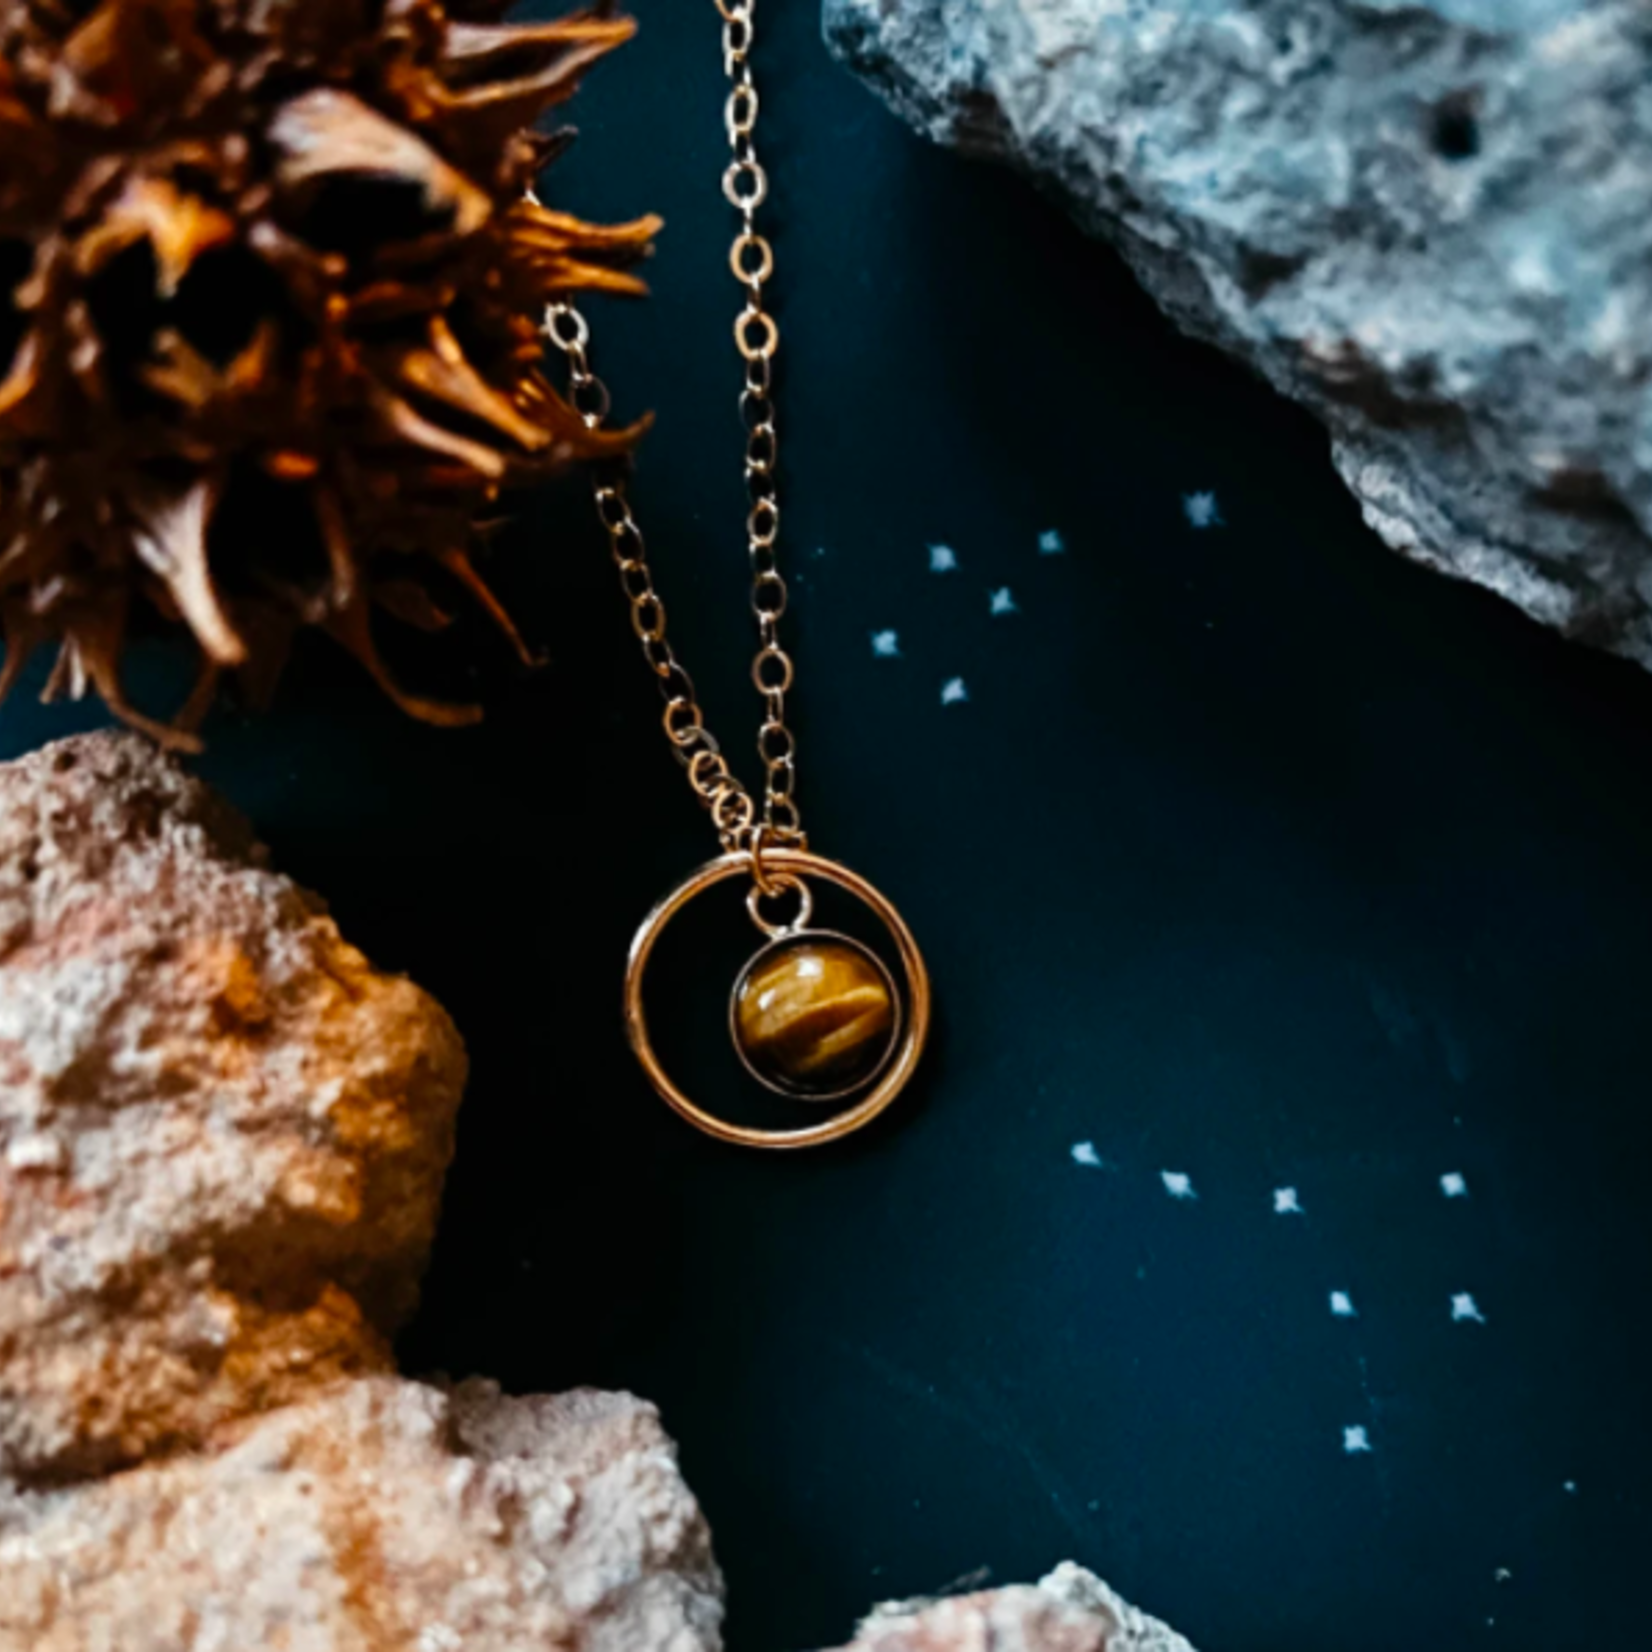 *Rings of Saturn Mini Necklace